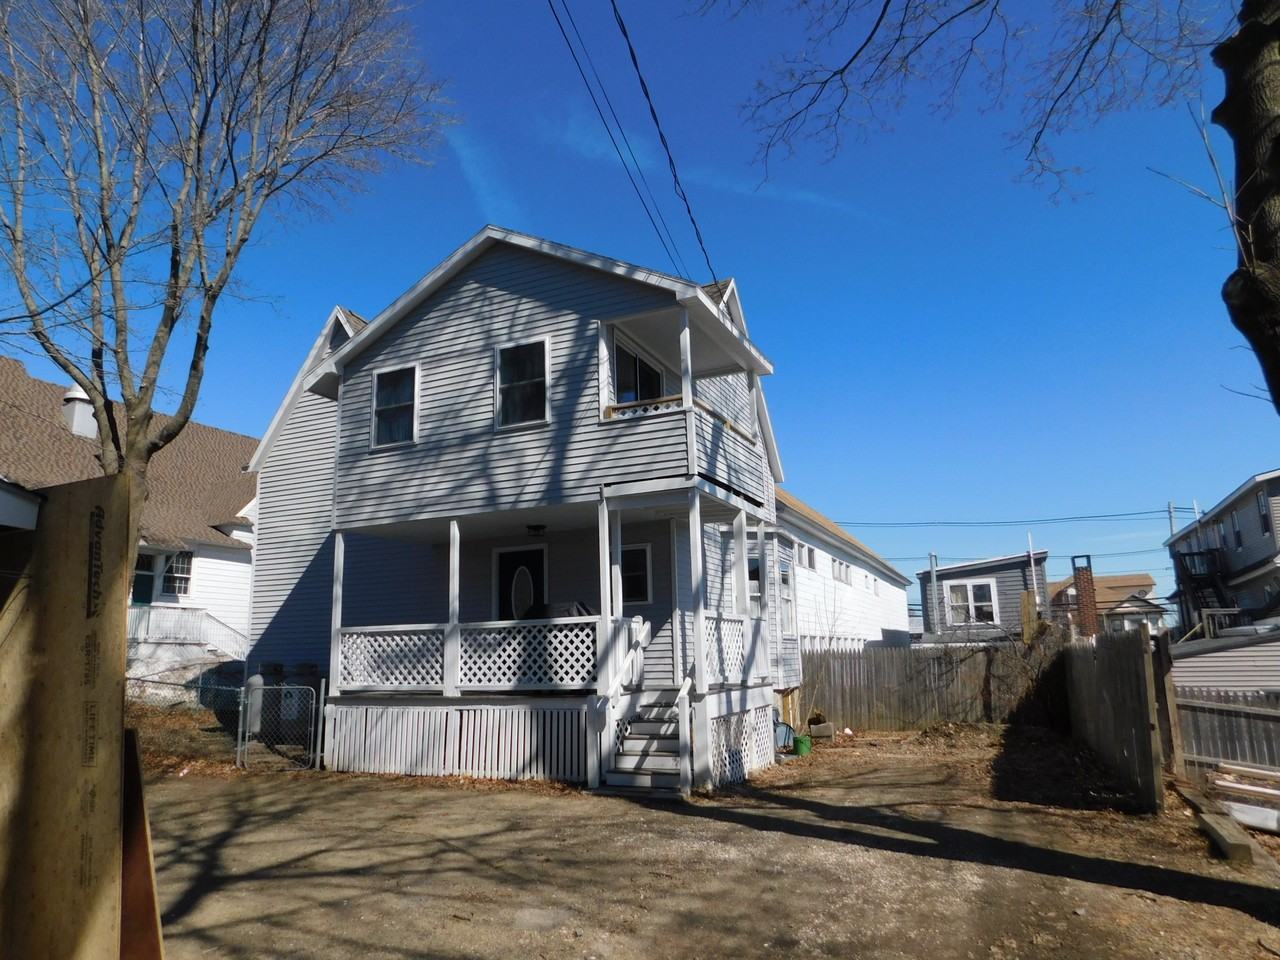 38 1/2 B Staples St, Old Orchard Beach, ME 04064 3 Bedroom Apartment for Rent for $1,985/month ...